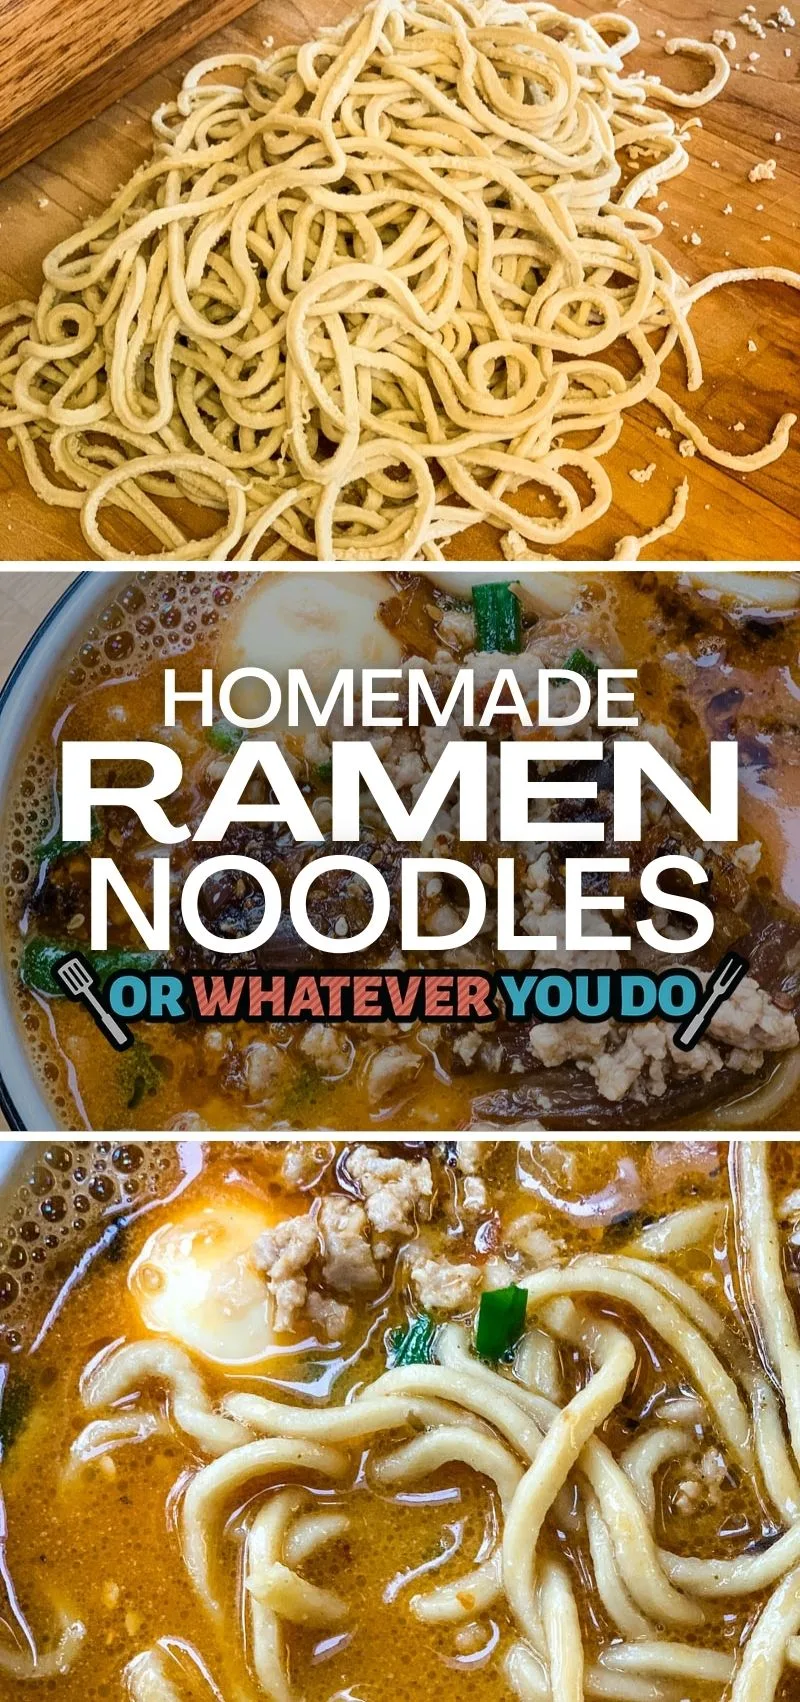 What's a good home made noodle machine? I've been making ramen for about a  year and want to get into homemade noodles. Any recommendations on a solid  beginner pasta cutter/press ? 